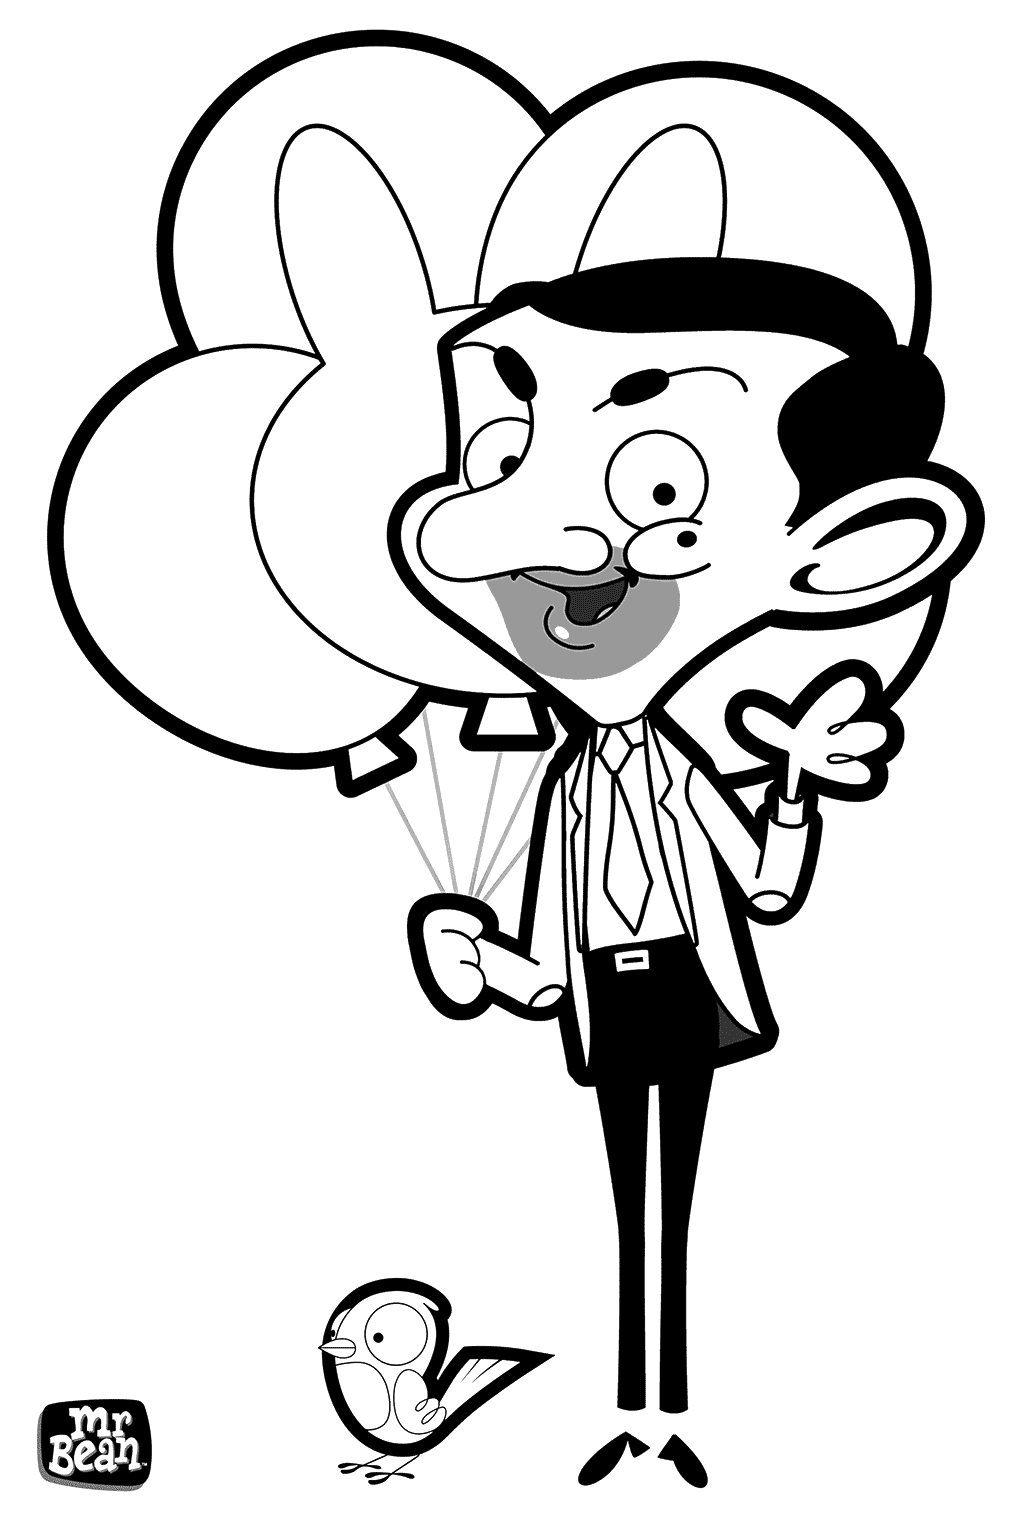 Mr Bean with Balloons Coloring Page